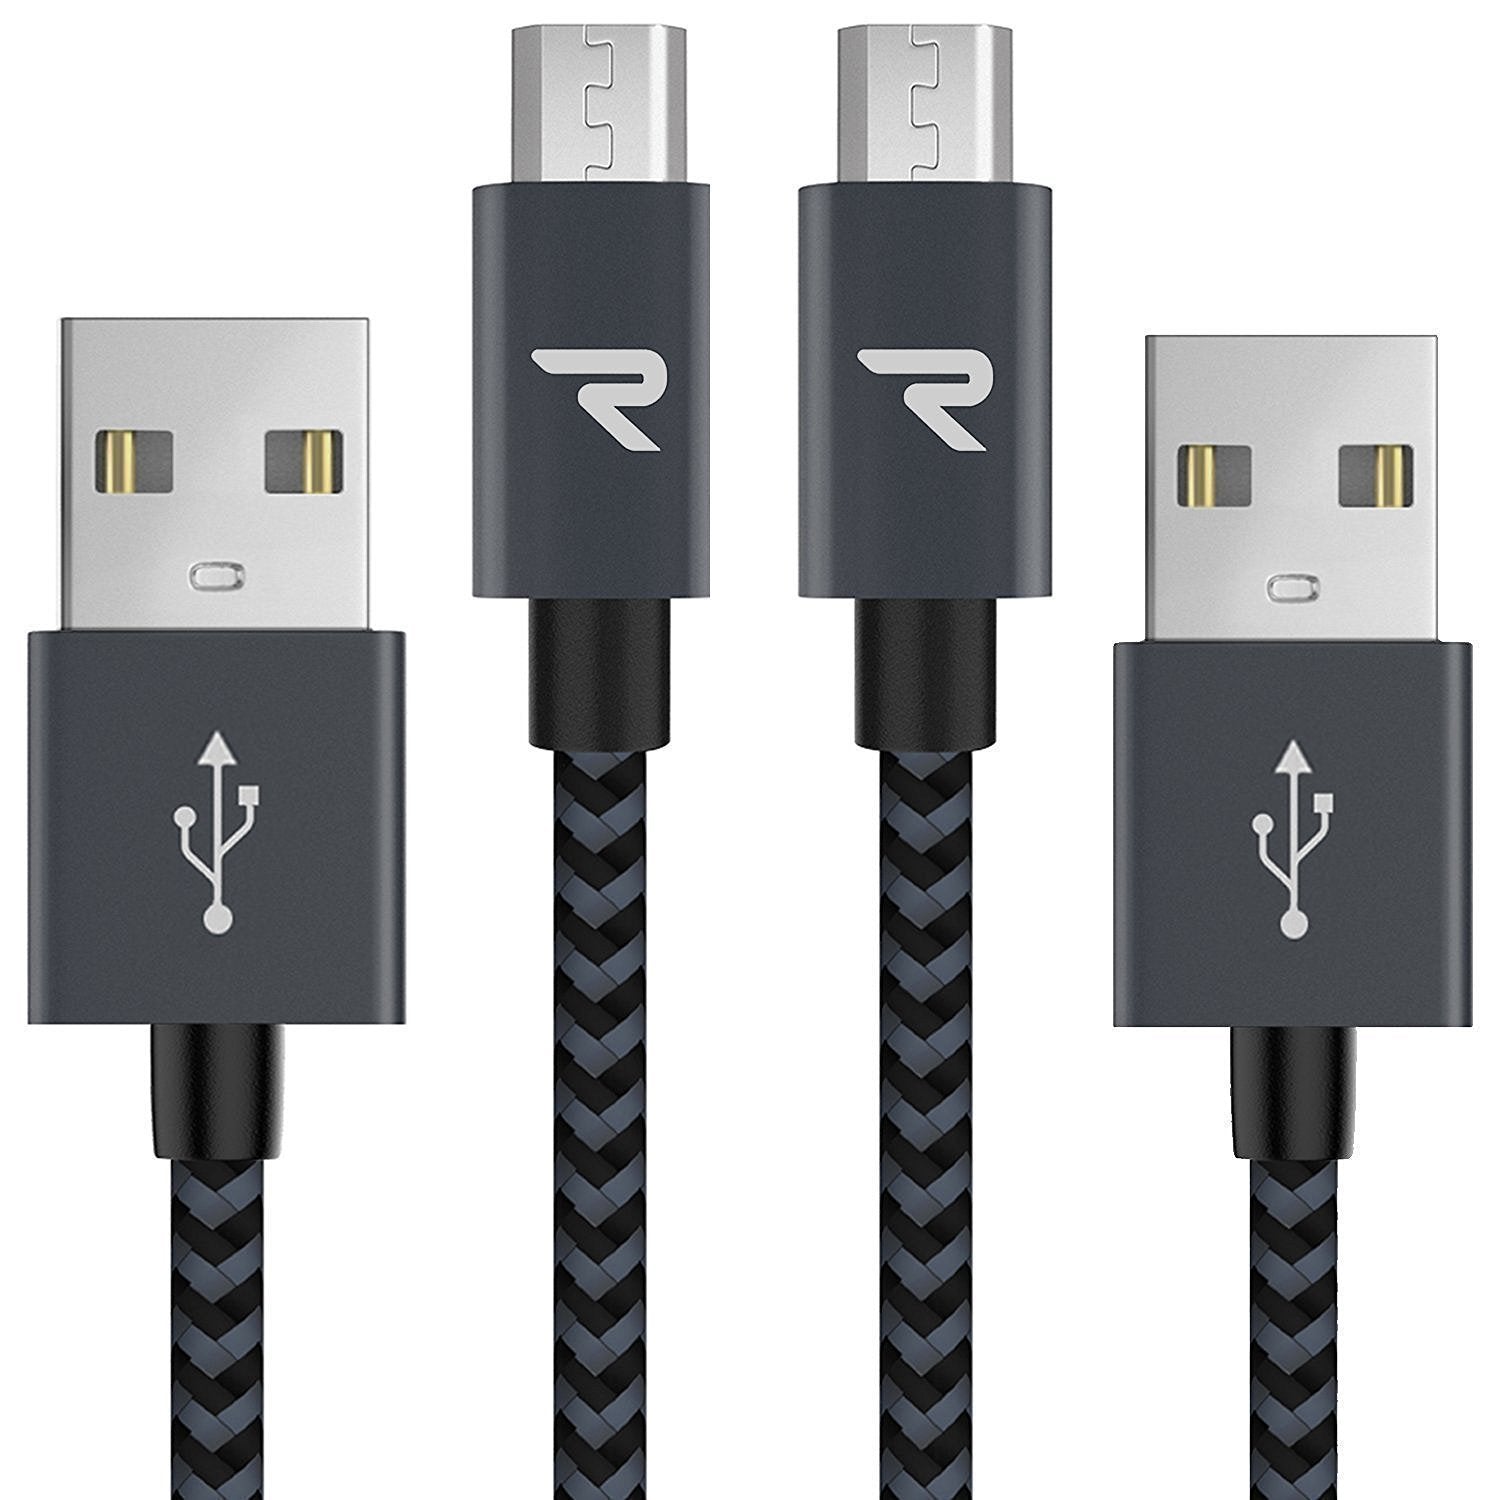 RAMPOW Micro USB Cables 2.4A High-Speed Android Charger Cable 2-Pack 1m/3.3ft Nylon Braided Samsung USB Cables for Samsung Galaxy S7/S6, Nexus, Sony, Kindle, PS4, Motorola, LG, HTC, Nokia Space Grey